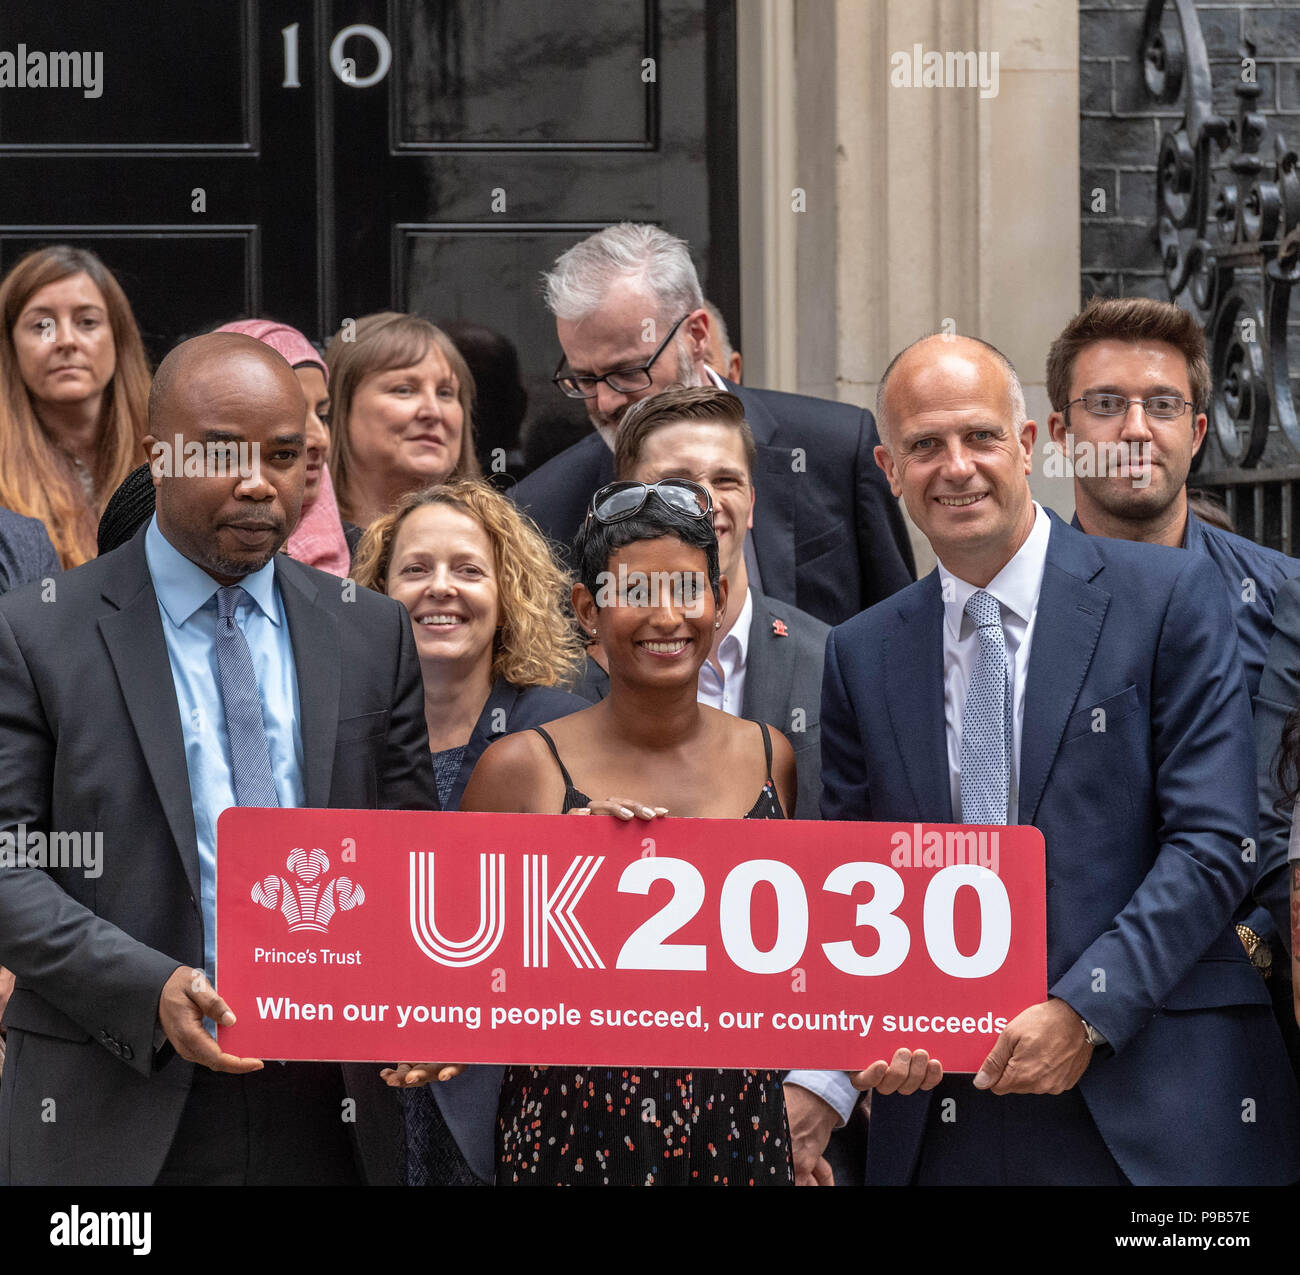 Downing Street,London 17th July 2018 Members of the Princes Trust UK2030 Youth Taskforce launched their initiative  at 10 Downing Street including Naga Munchetty BBC News presenter Chair of the taskforce Credit: Ian Davidson/Alamy Live News Stock Photo